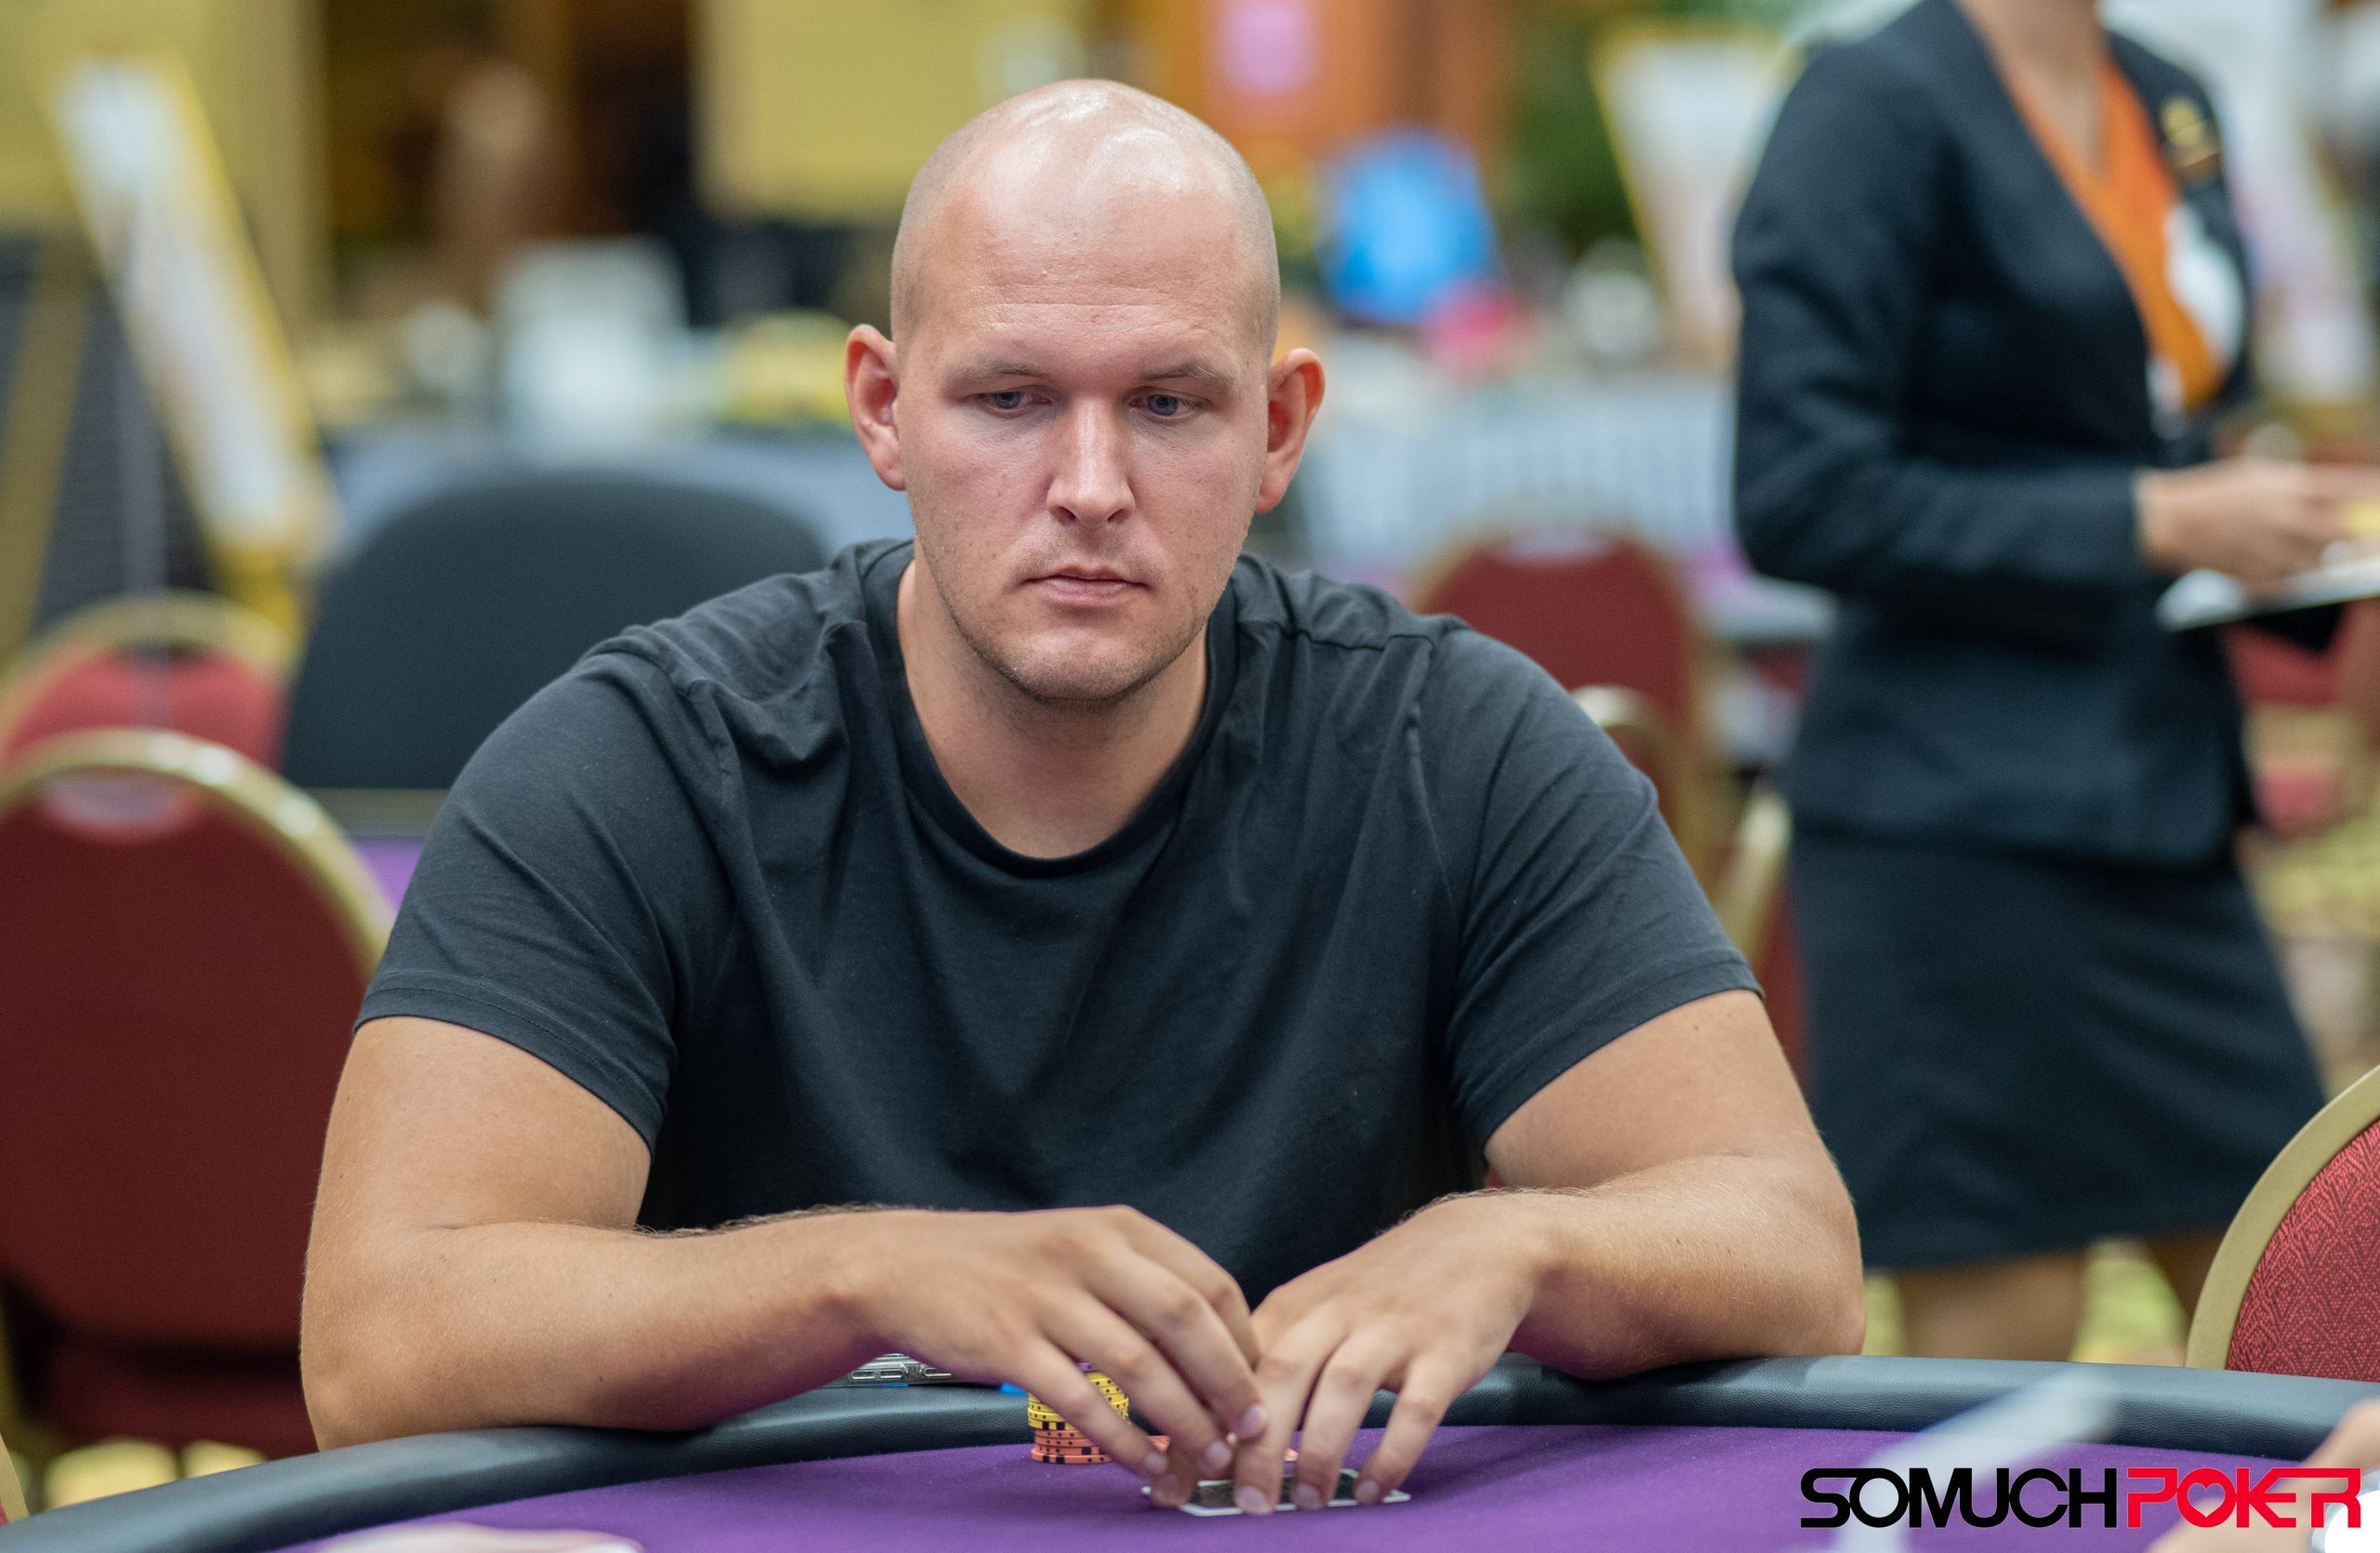 APPT Cambodia: APPT National $100,000 guaranteed final two flights underway; Minwoo Kang leads 13 Day 1A survivors